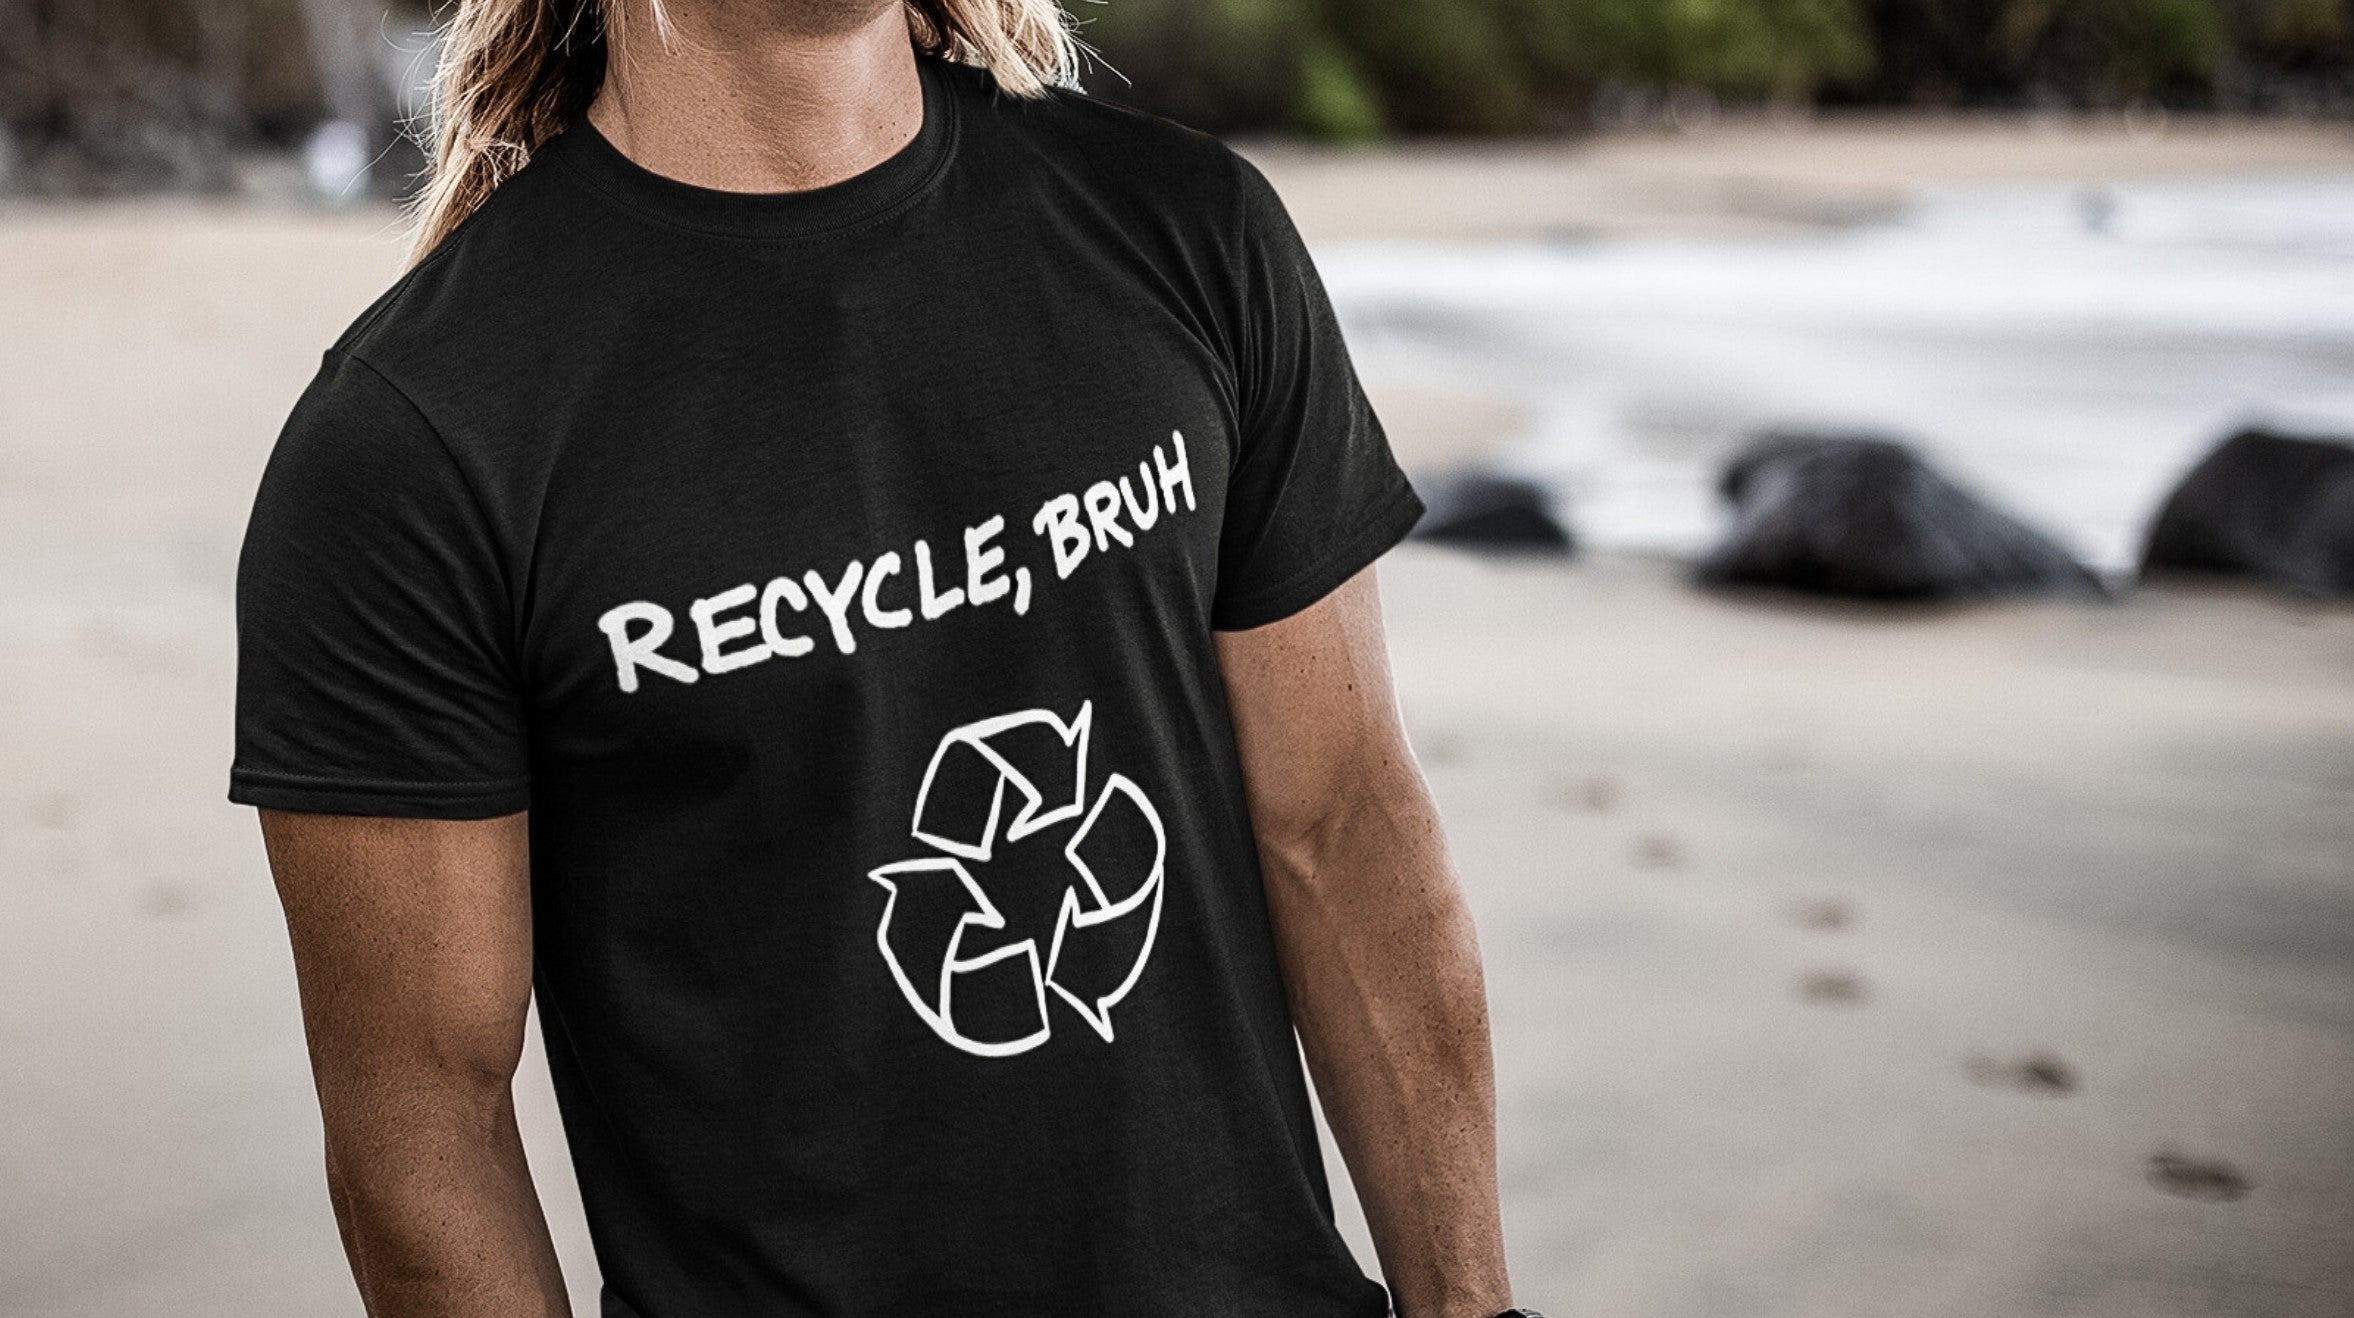 Funny Recycling Environment Themed Men's Shirt by Laughs To Self Streetwear